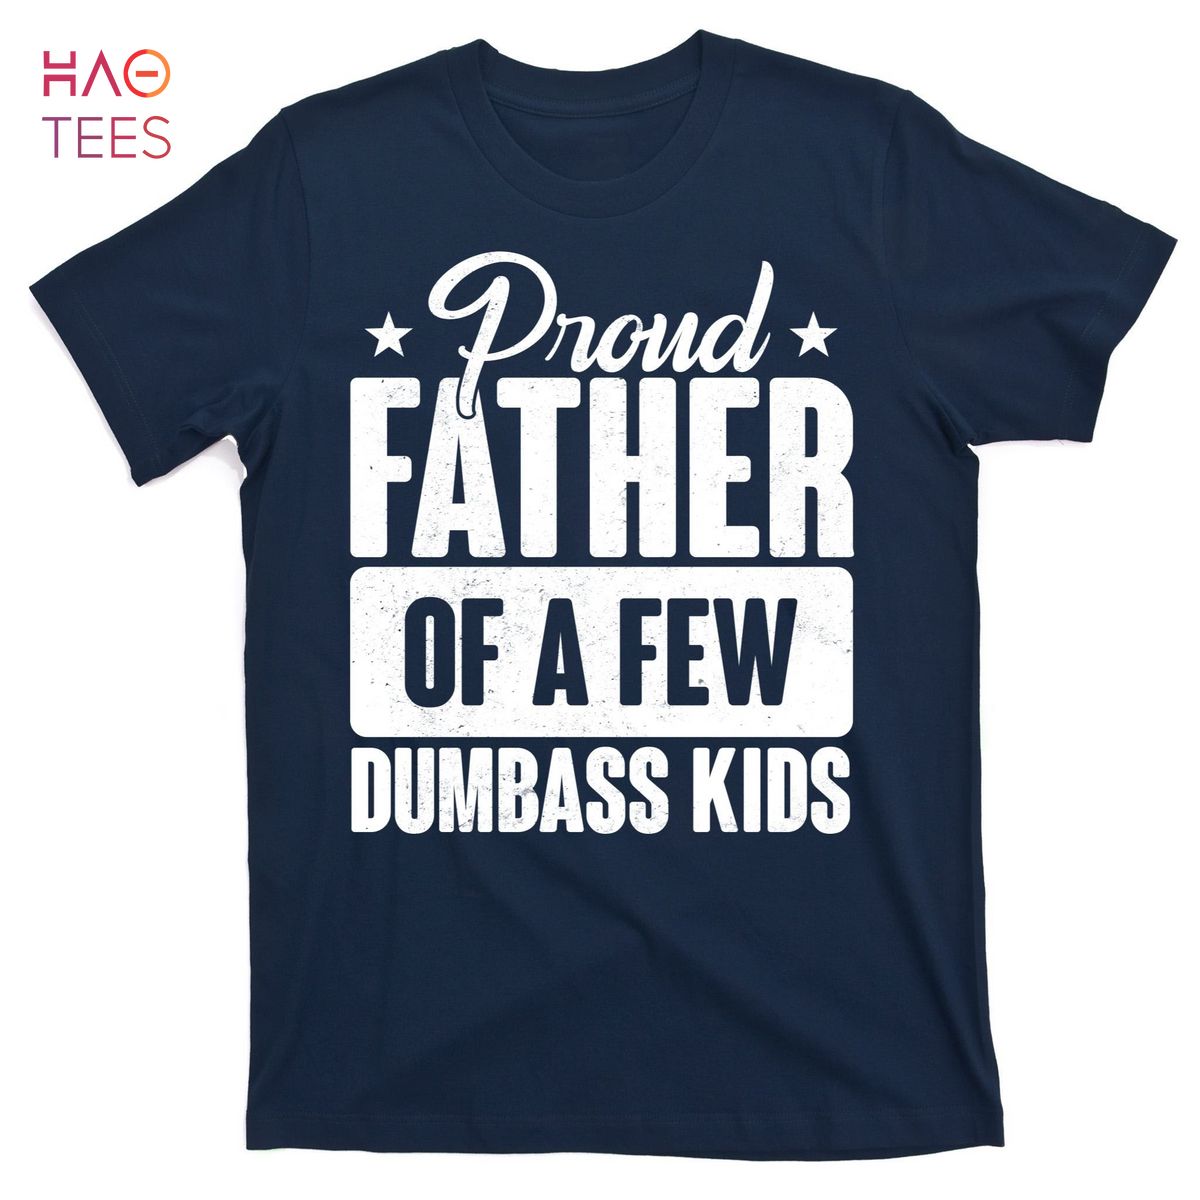 HOT Proud Father Of Dumbass Kids Funny Dad T-Shirts